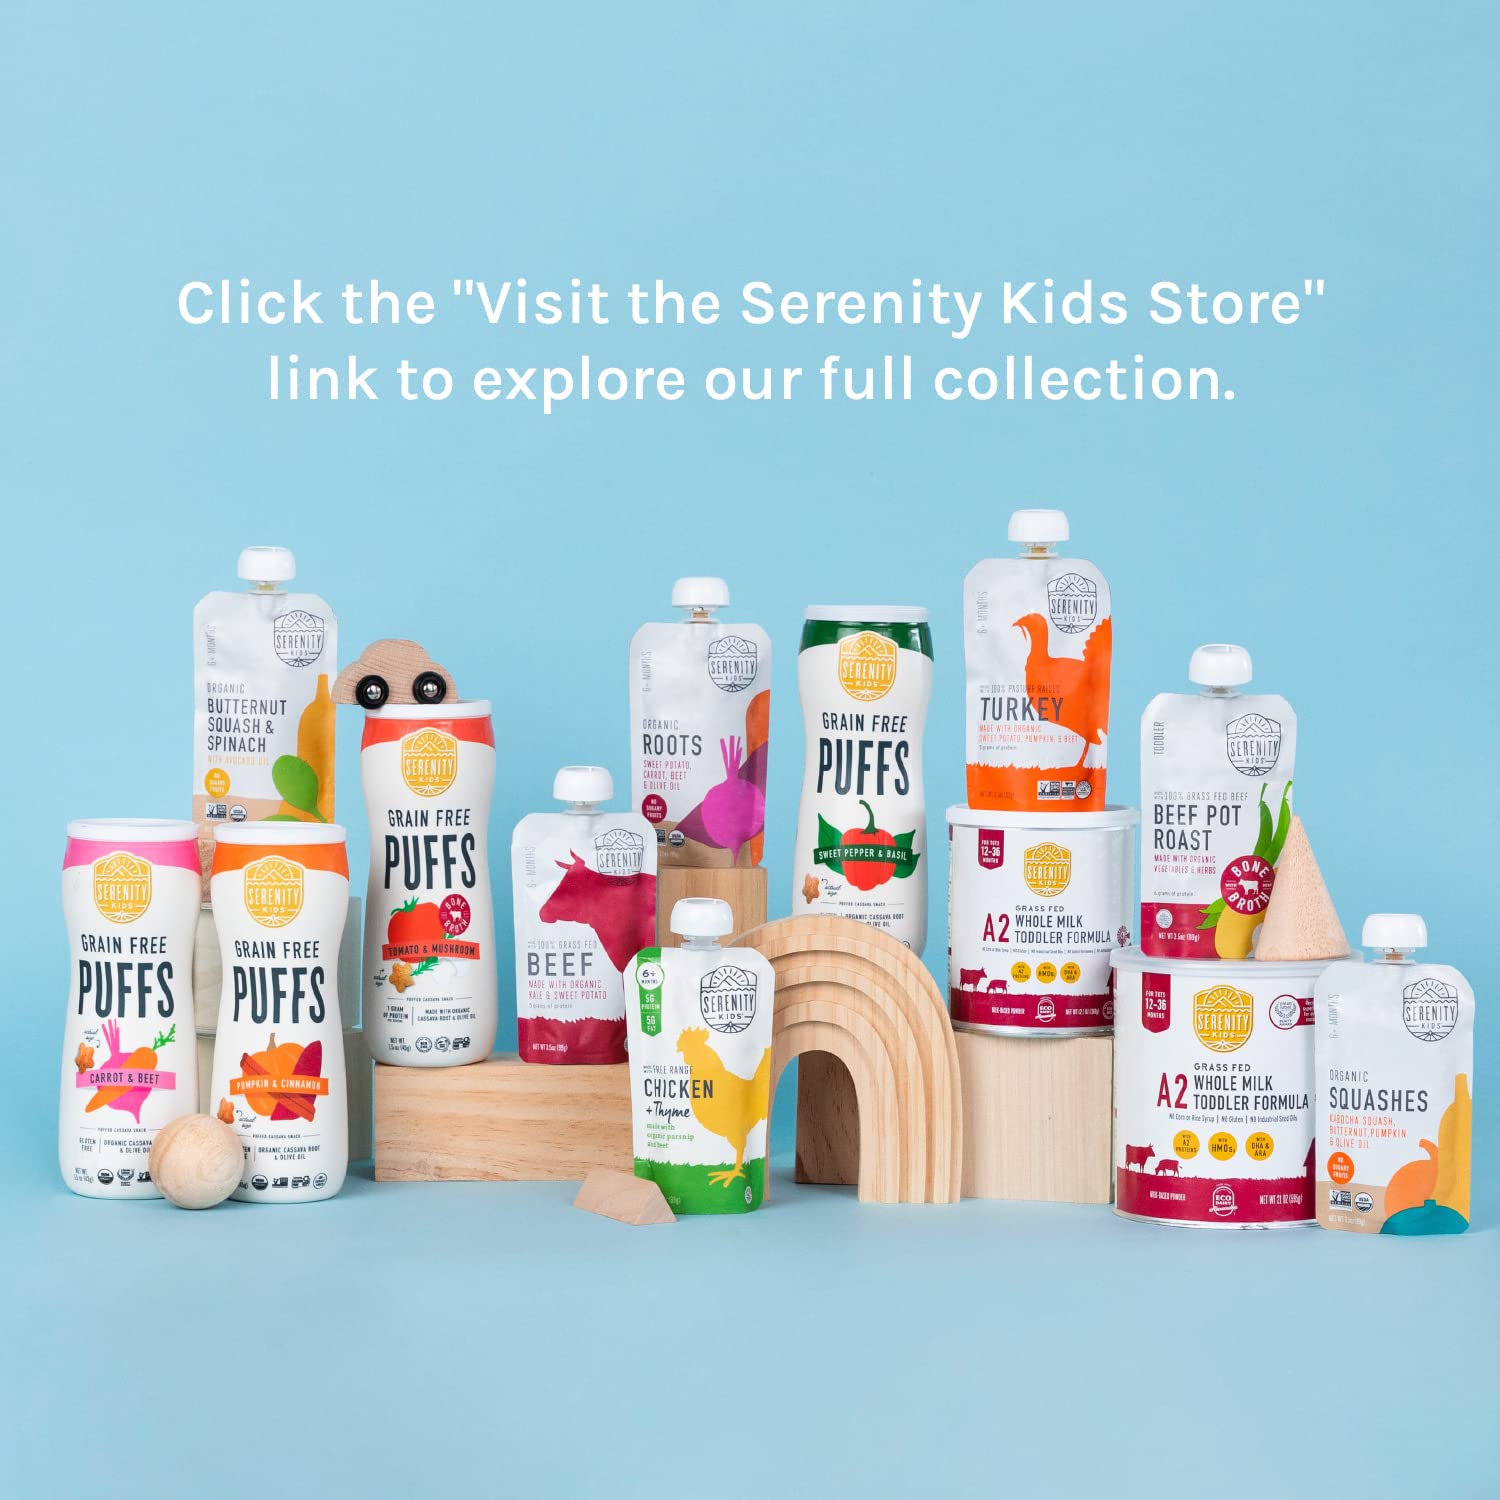 Serenity Kids Regenerative Land to Market Verified Baby Food Pouch Bundle | 6 Each of Grass Fed Bison, Beef & Ginger, and Beef (18 Count)